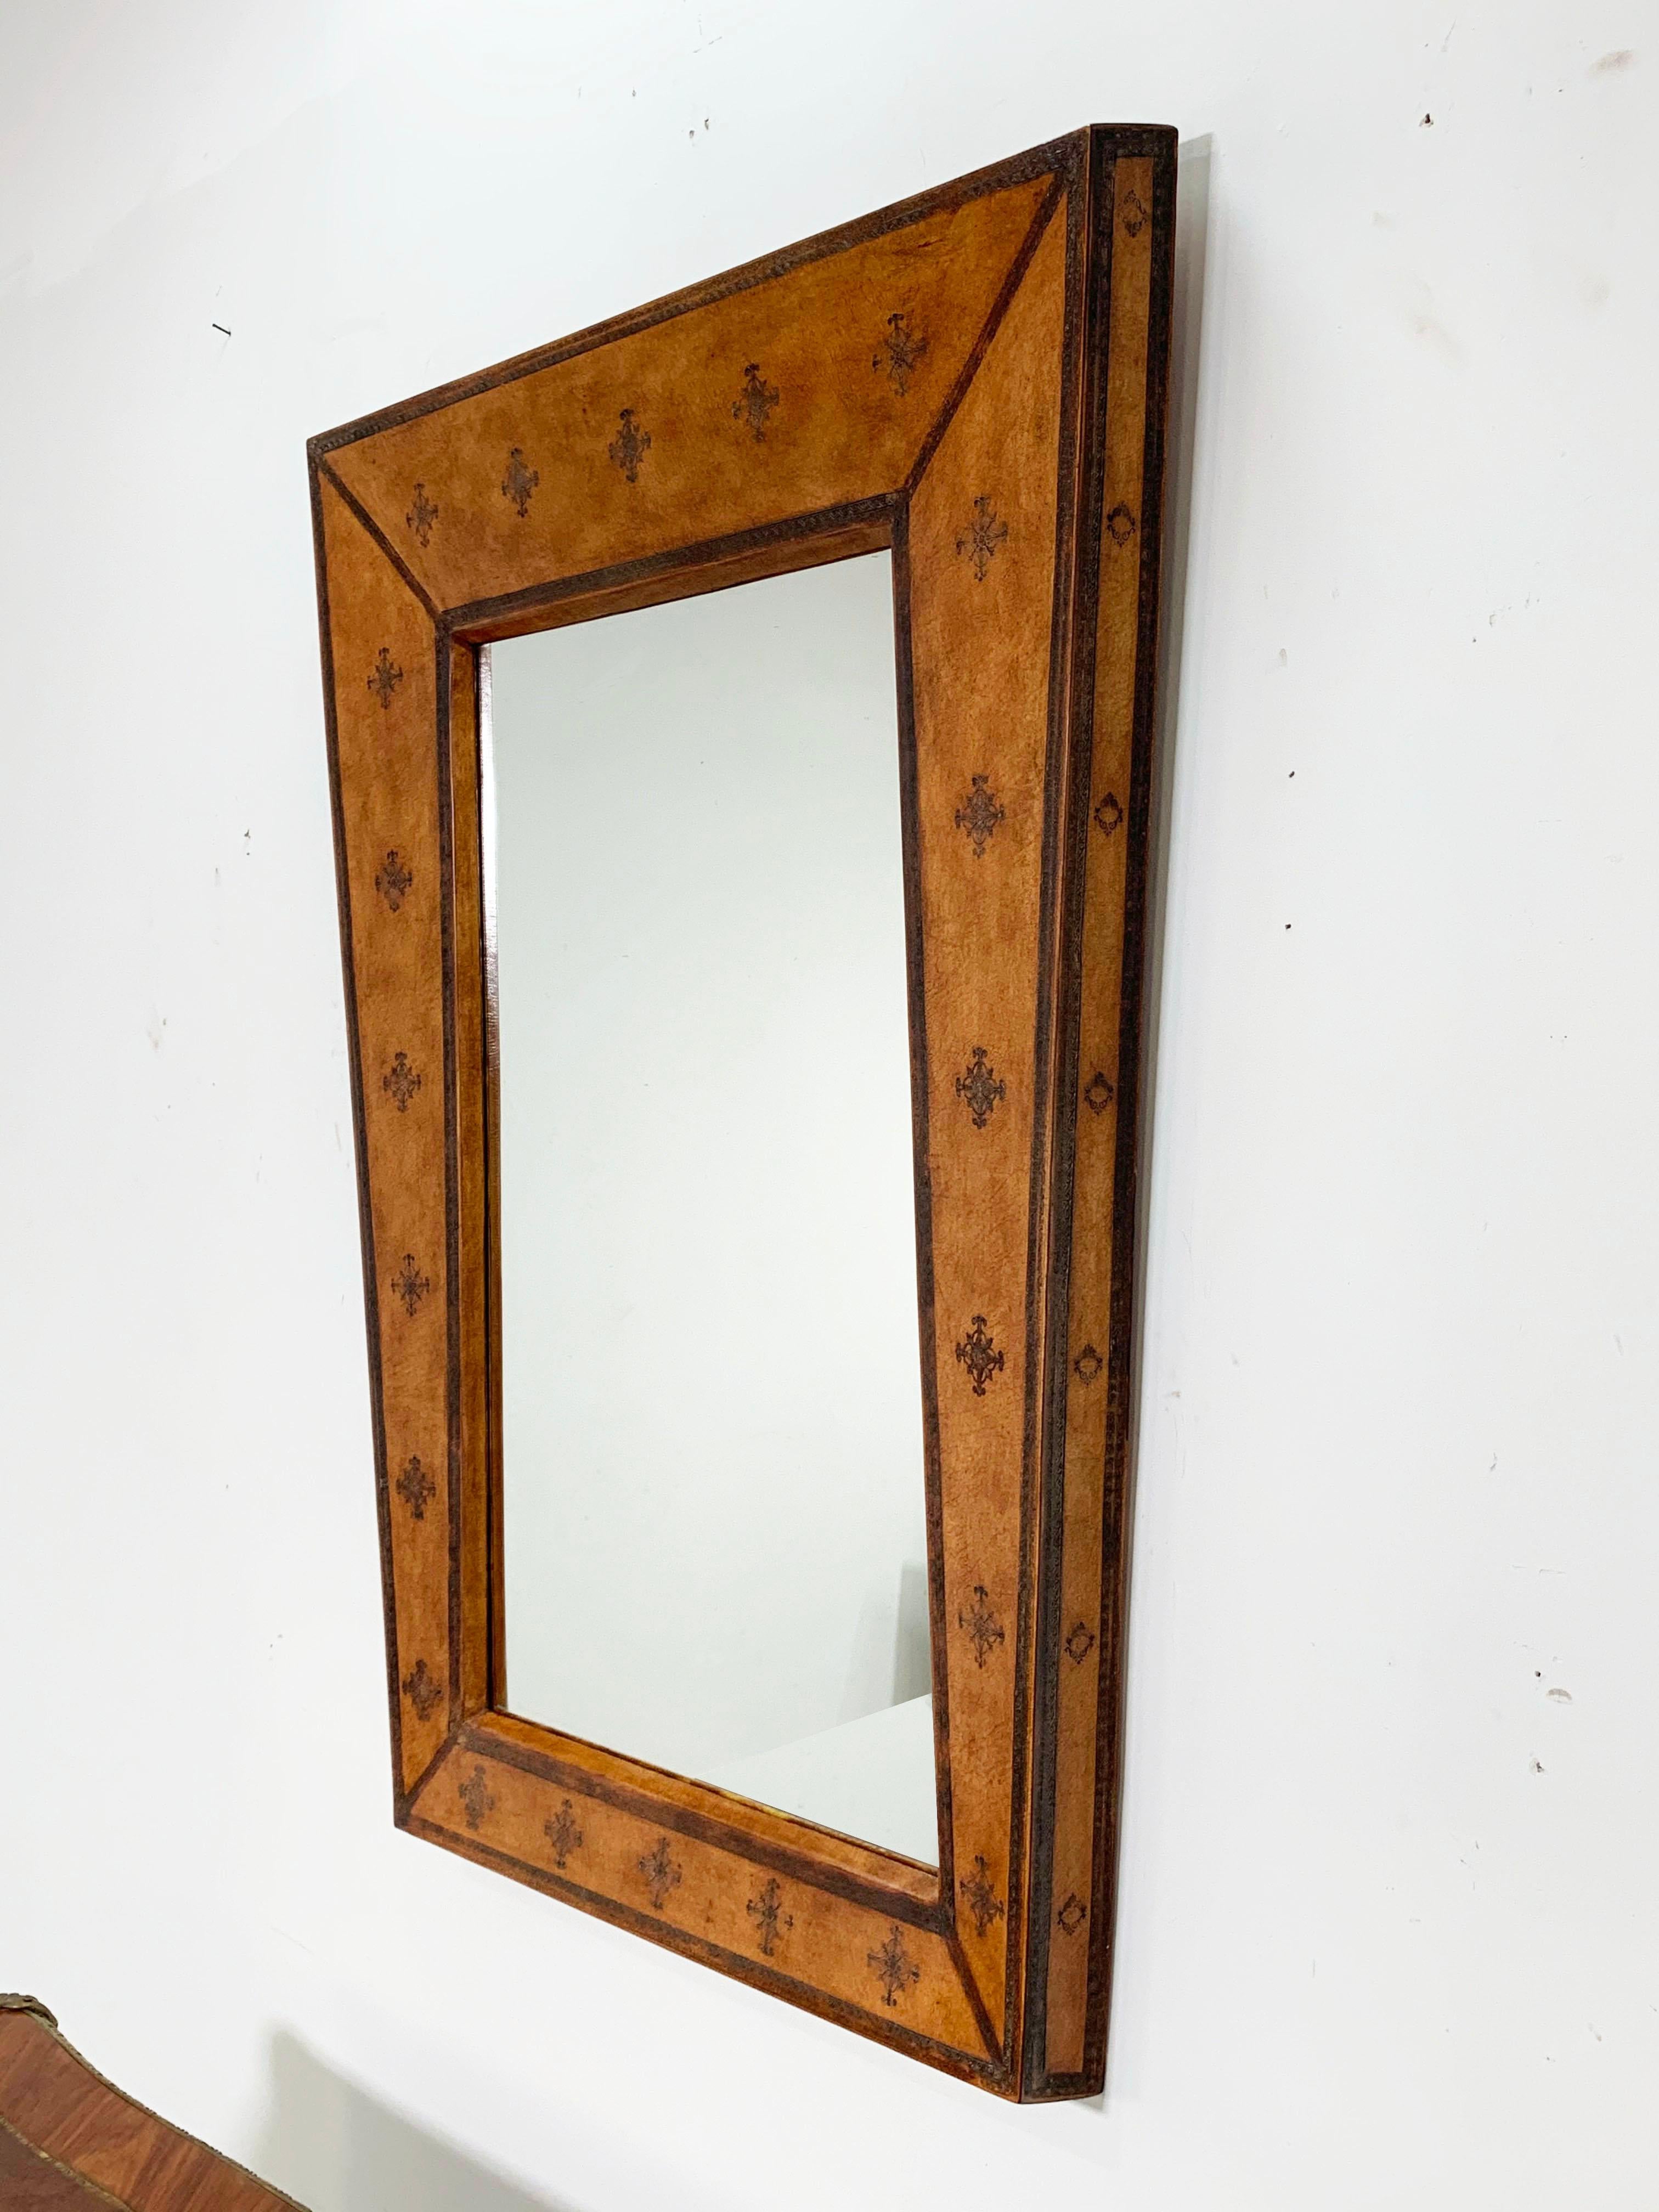 An elegant oversized trapezoidal wall mirror in tooled leather, circa 1970s.